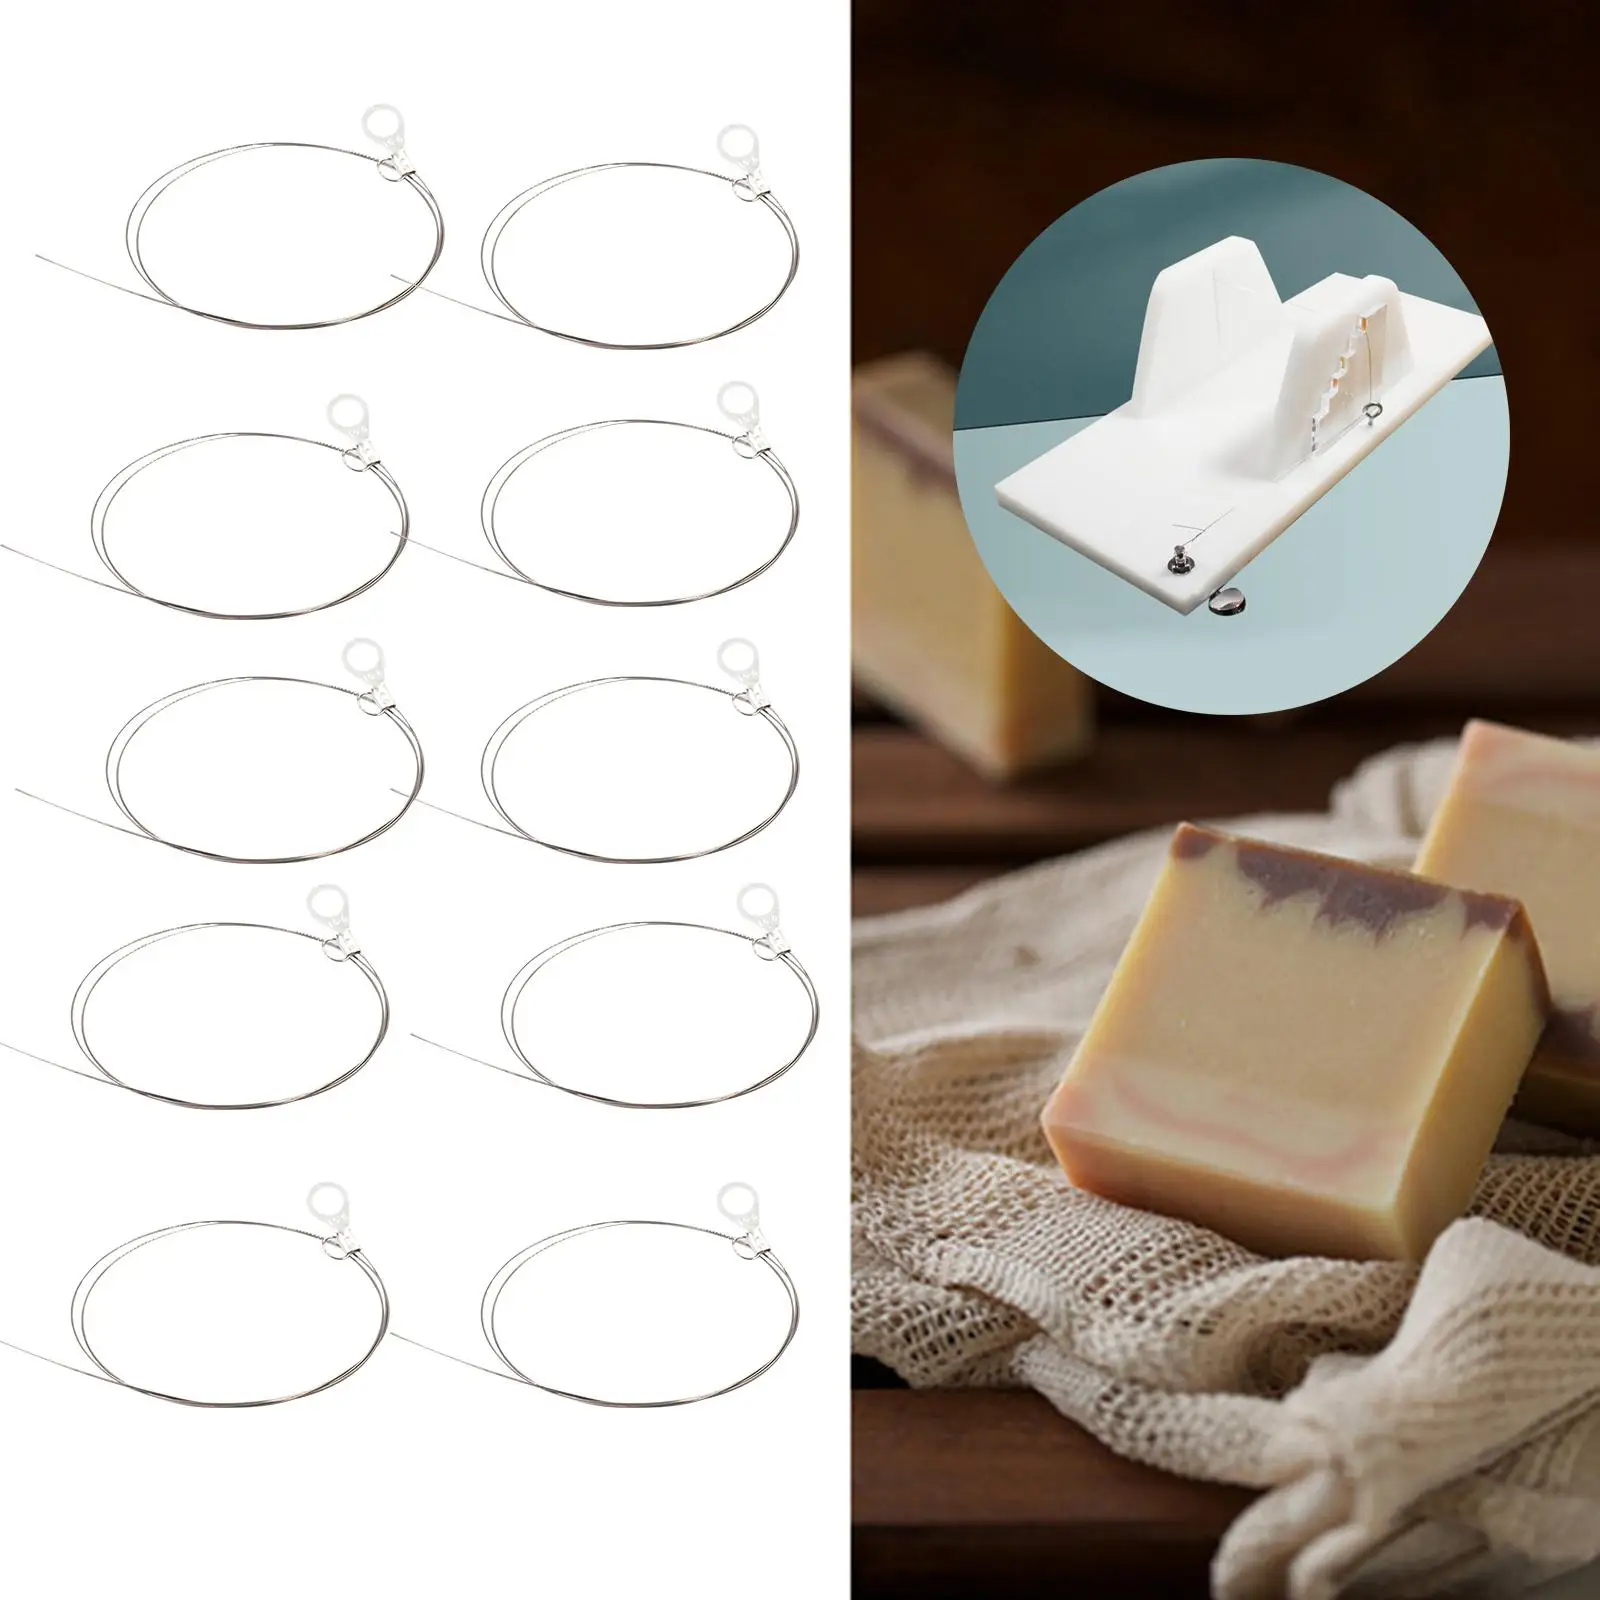 Soap Cutter Wires DIY Cutting Soap Soap Cutting Table Smooth Easy to Clean Precise for Cutting Soap, Cake, Cheese Durable